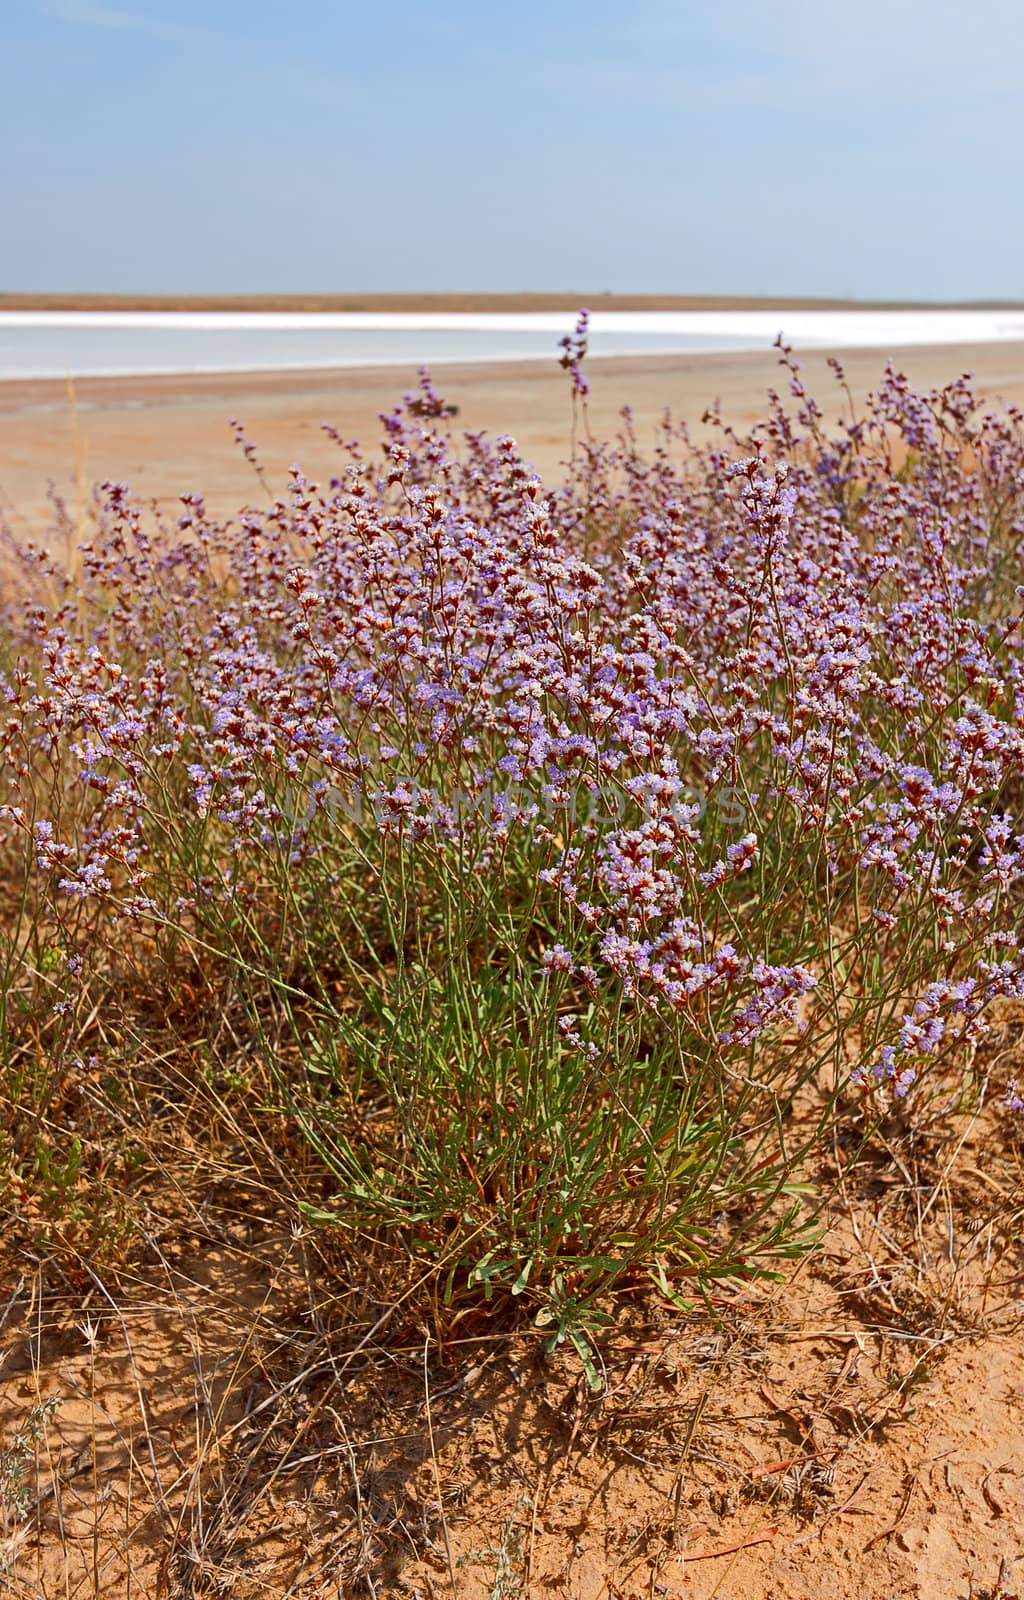 Flowers on  background of  desert landscape and  salt lake, Russia.